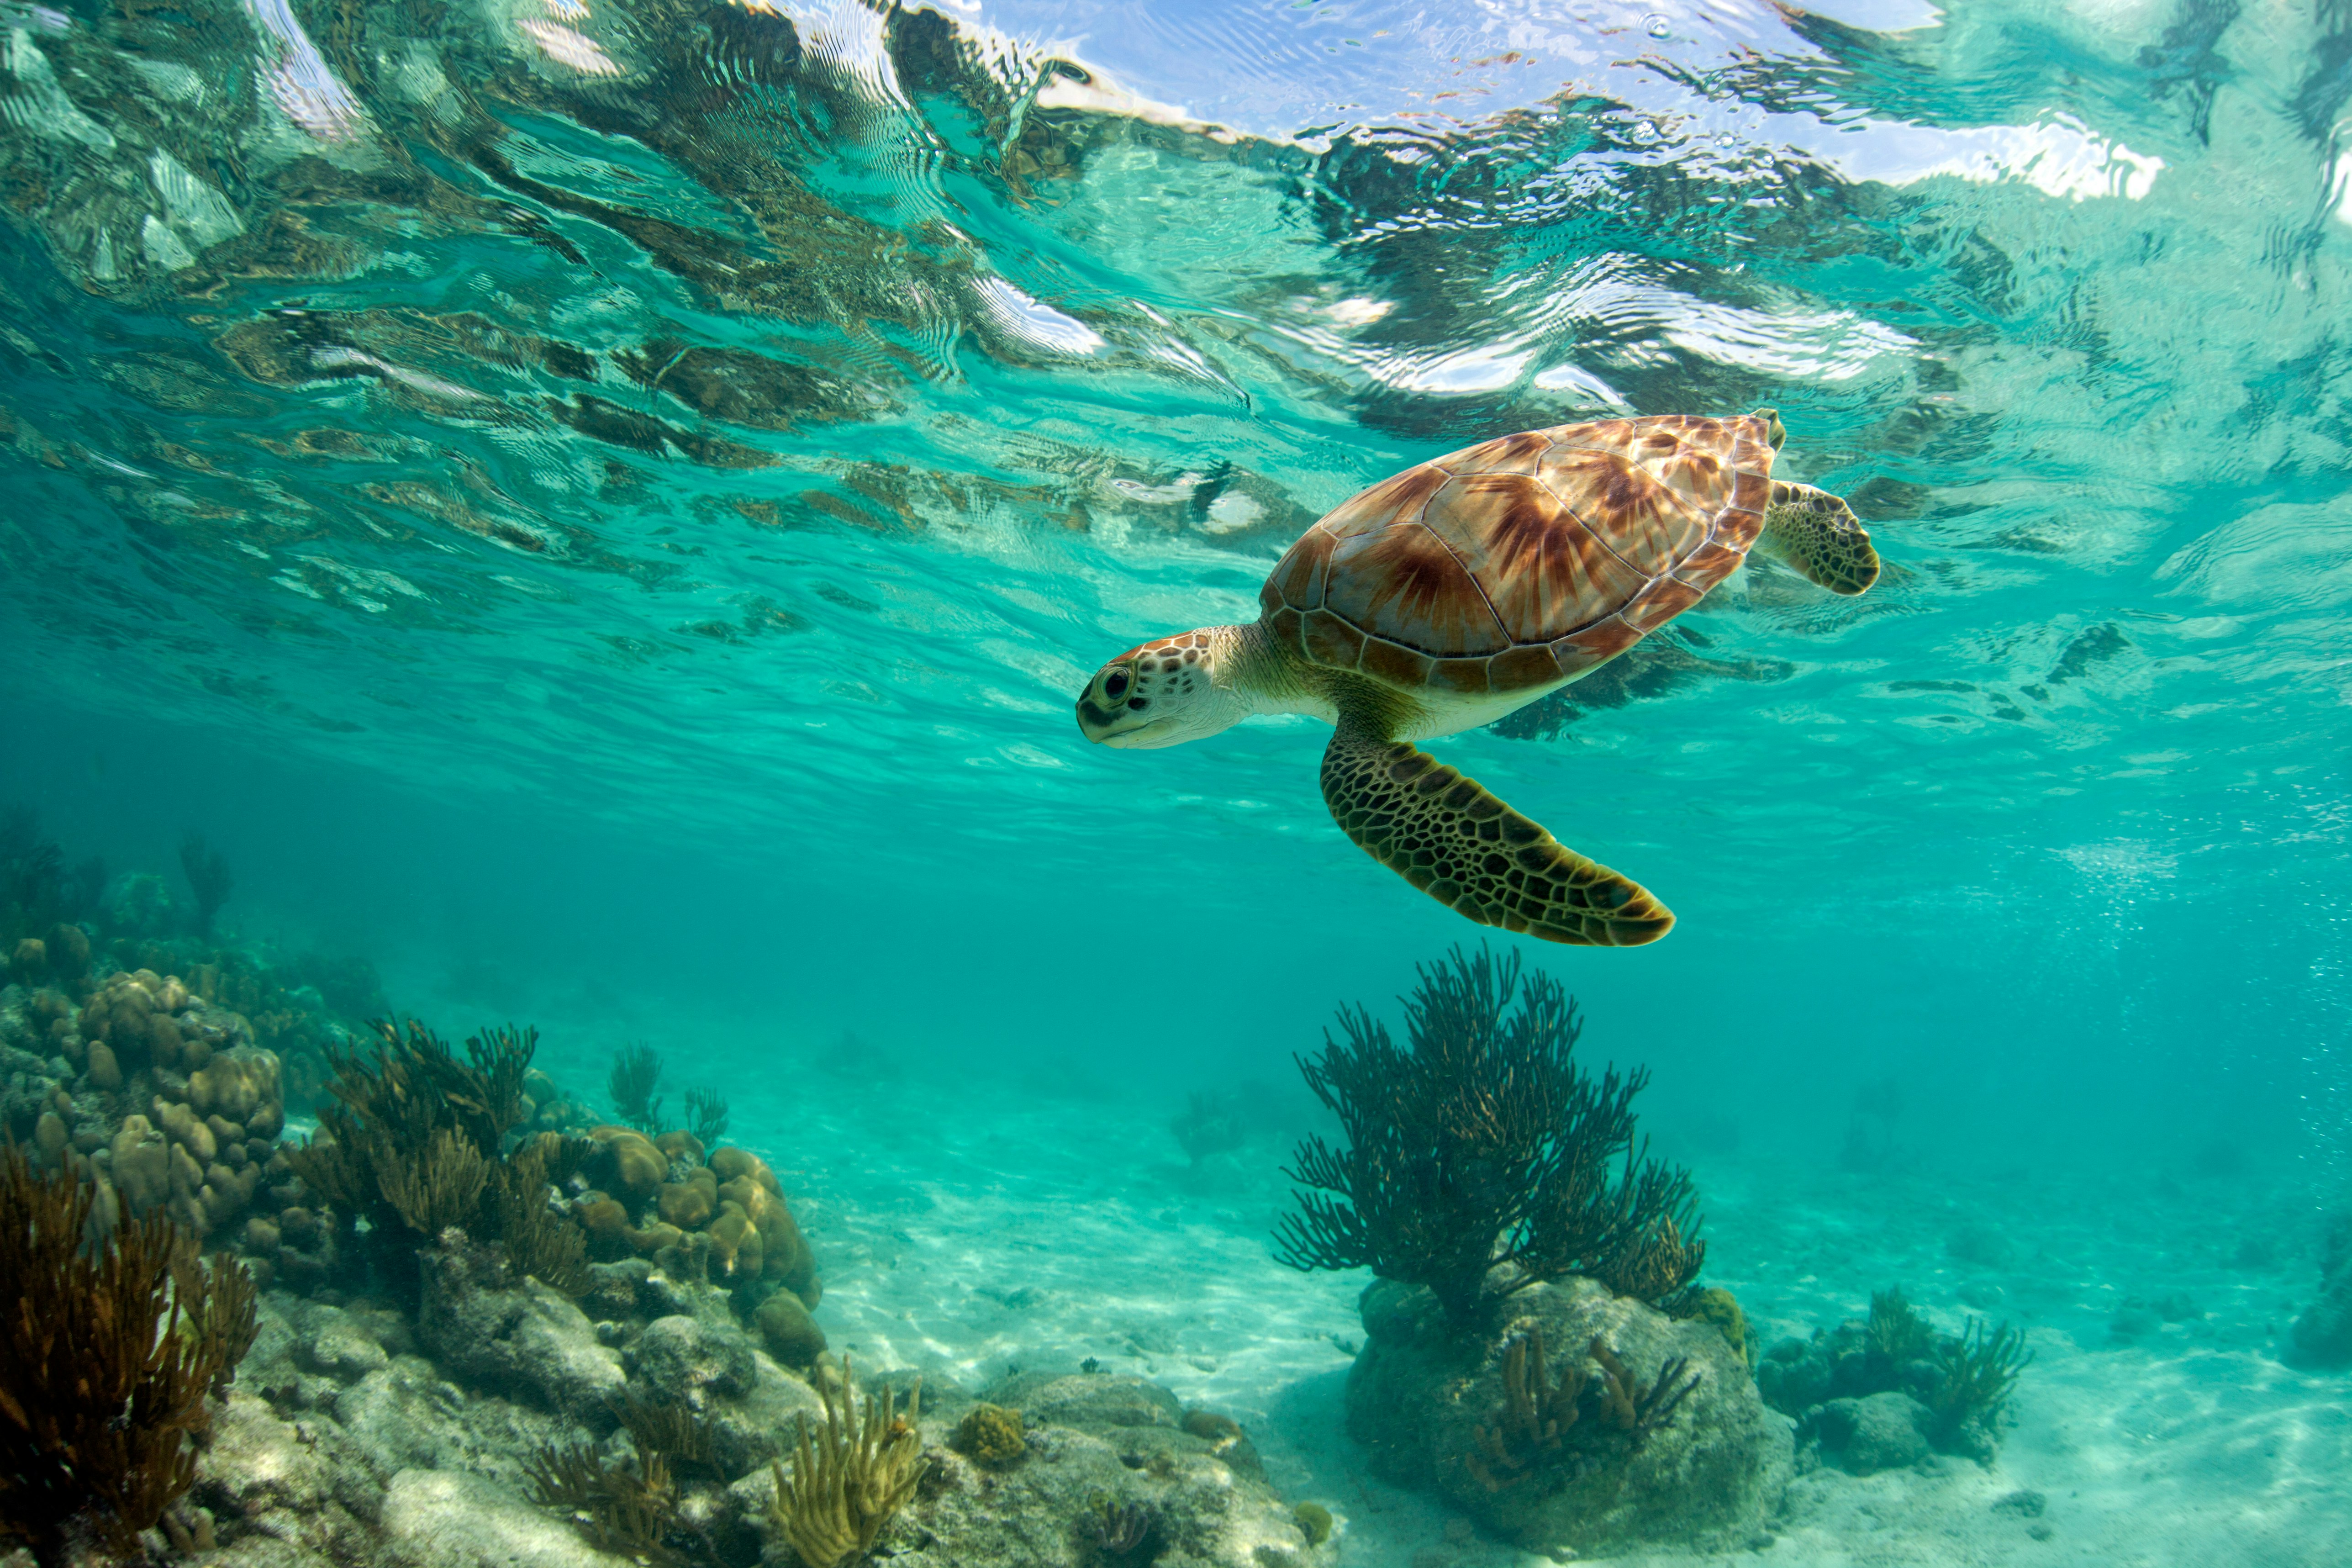 A sea turtle swimming over the coral reef in Akumal, Mexico